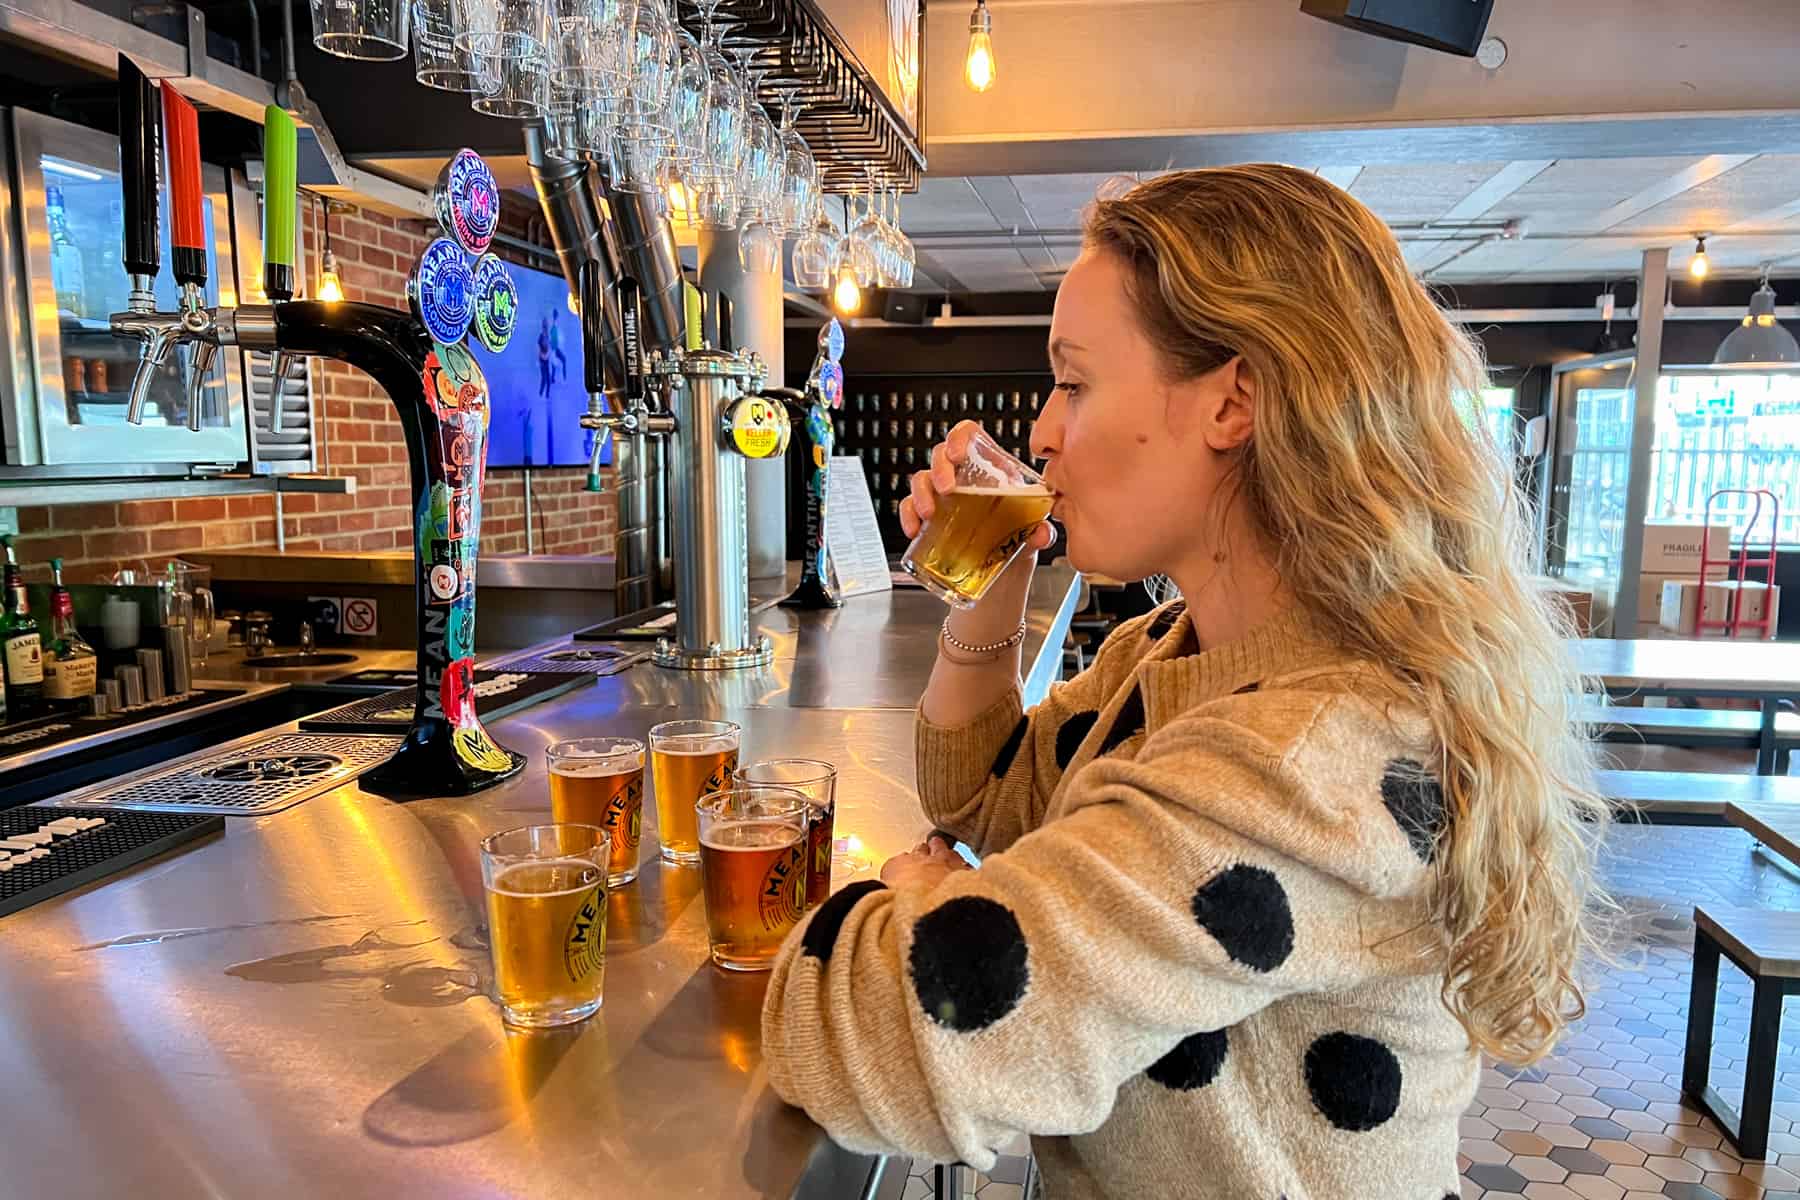 A woman with long hair and a beige jumper with black spots tries a selection of craft beers while standing at the bar. 